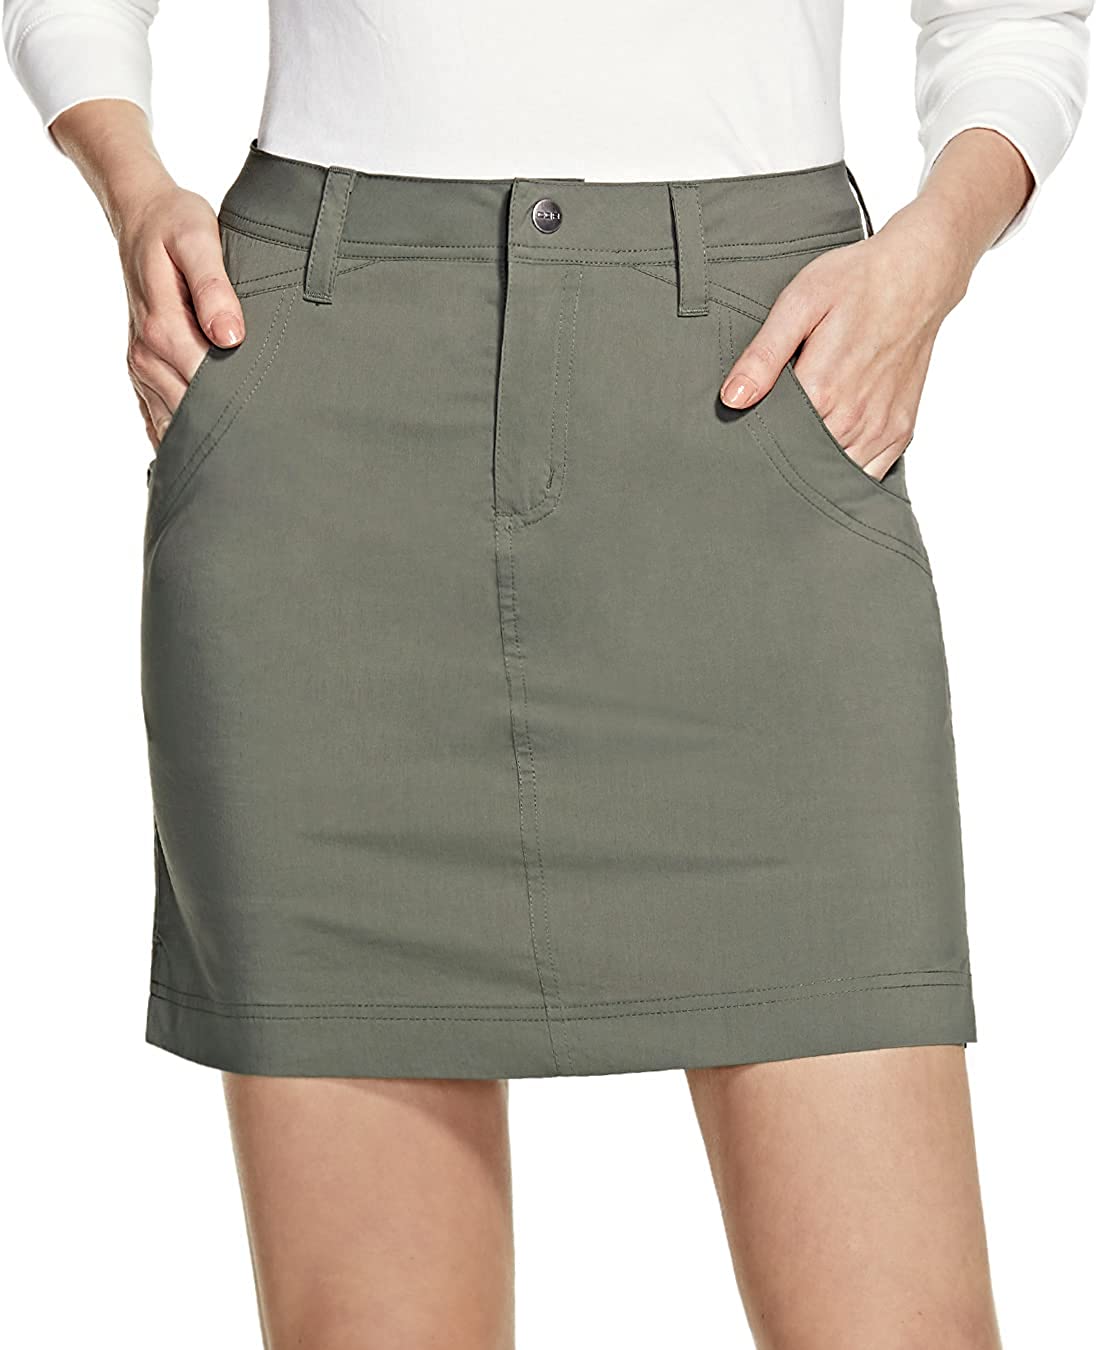 CQR Women's Outdoor Skort Active Athletic Casual Skirt with Shorts UPF 50 